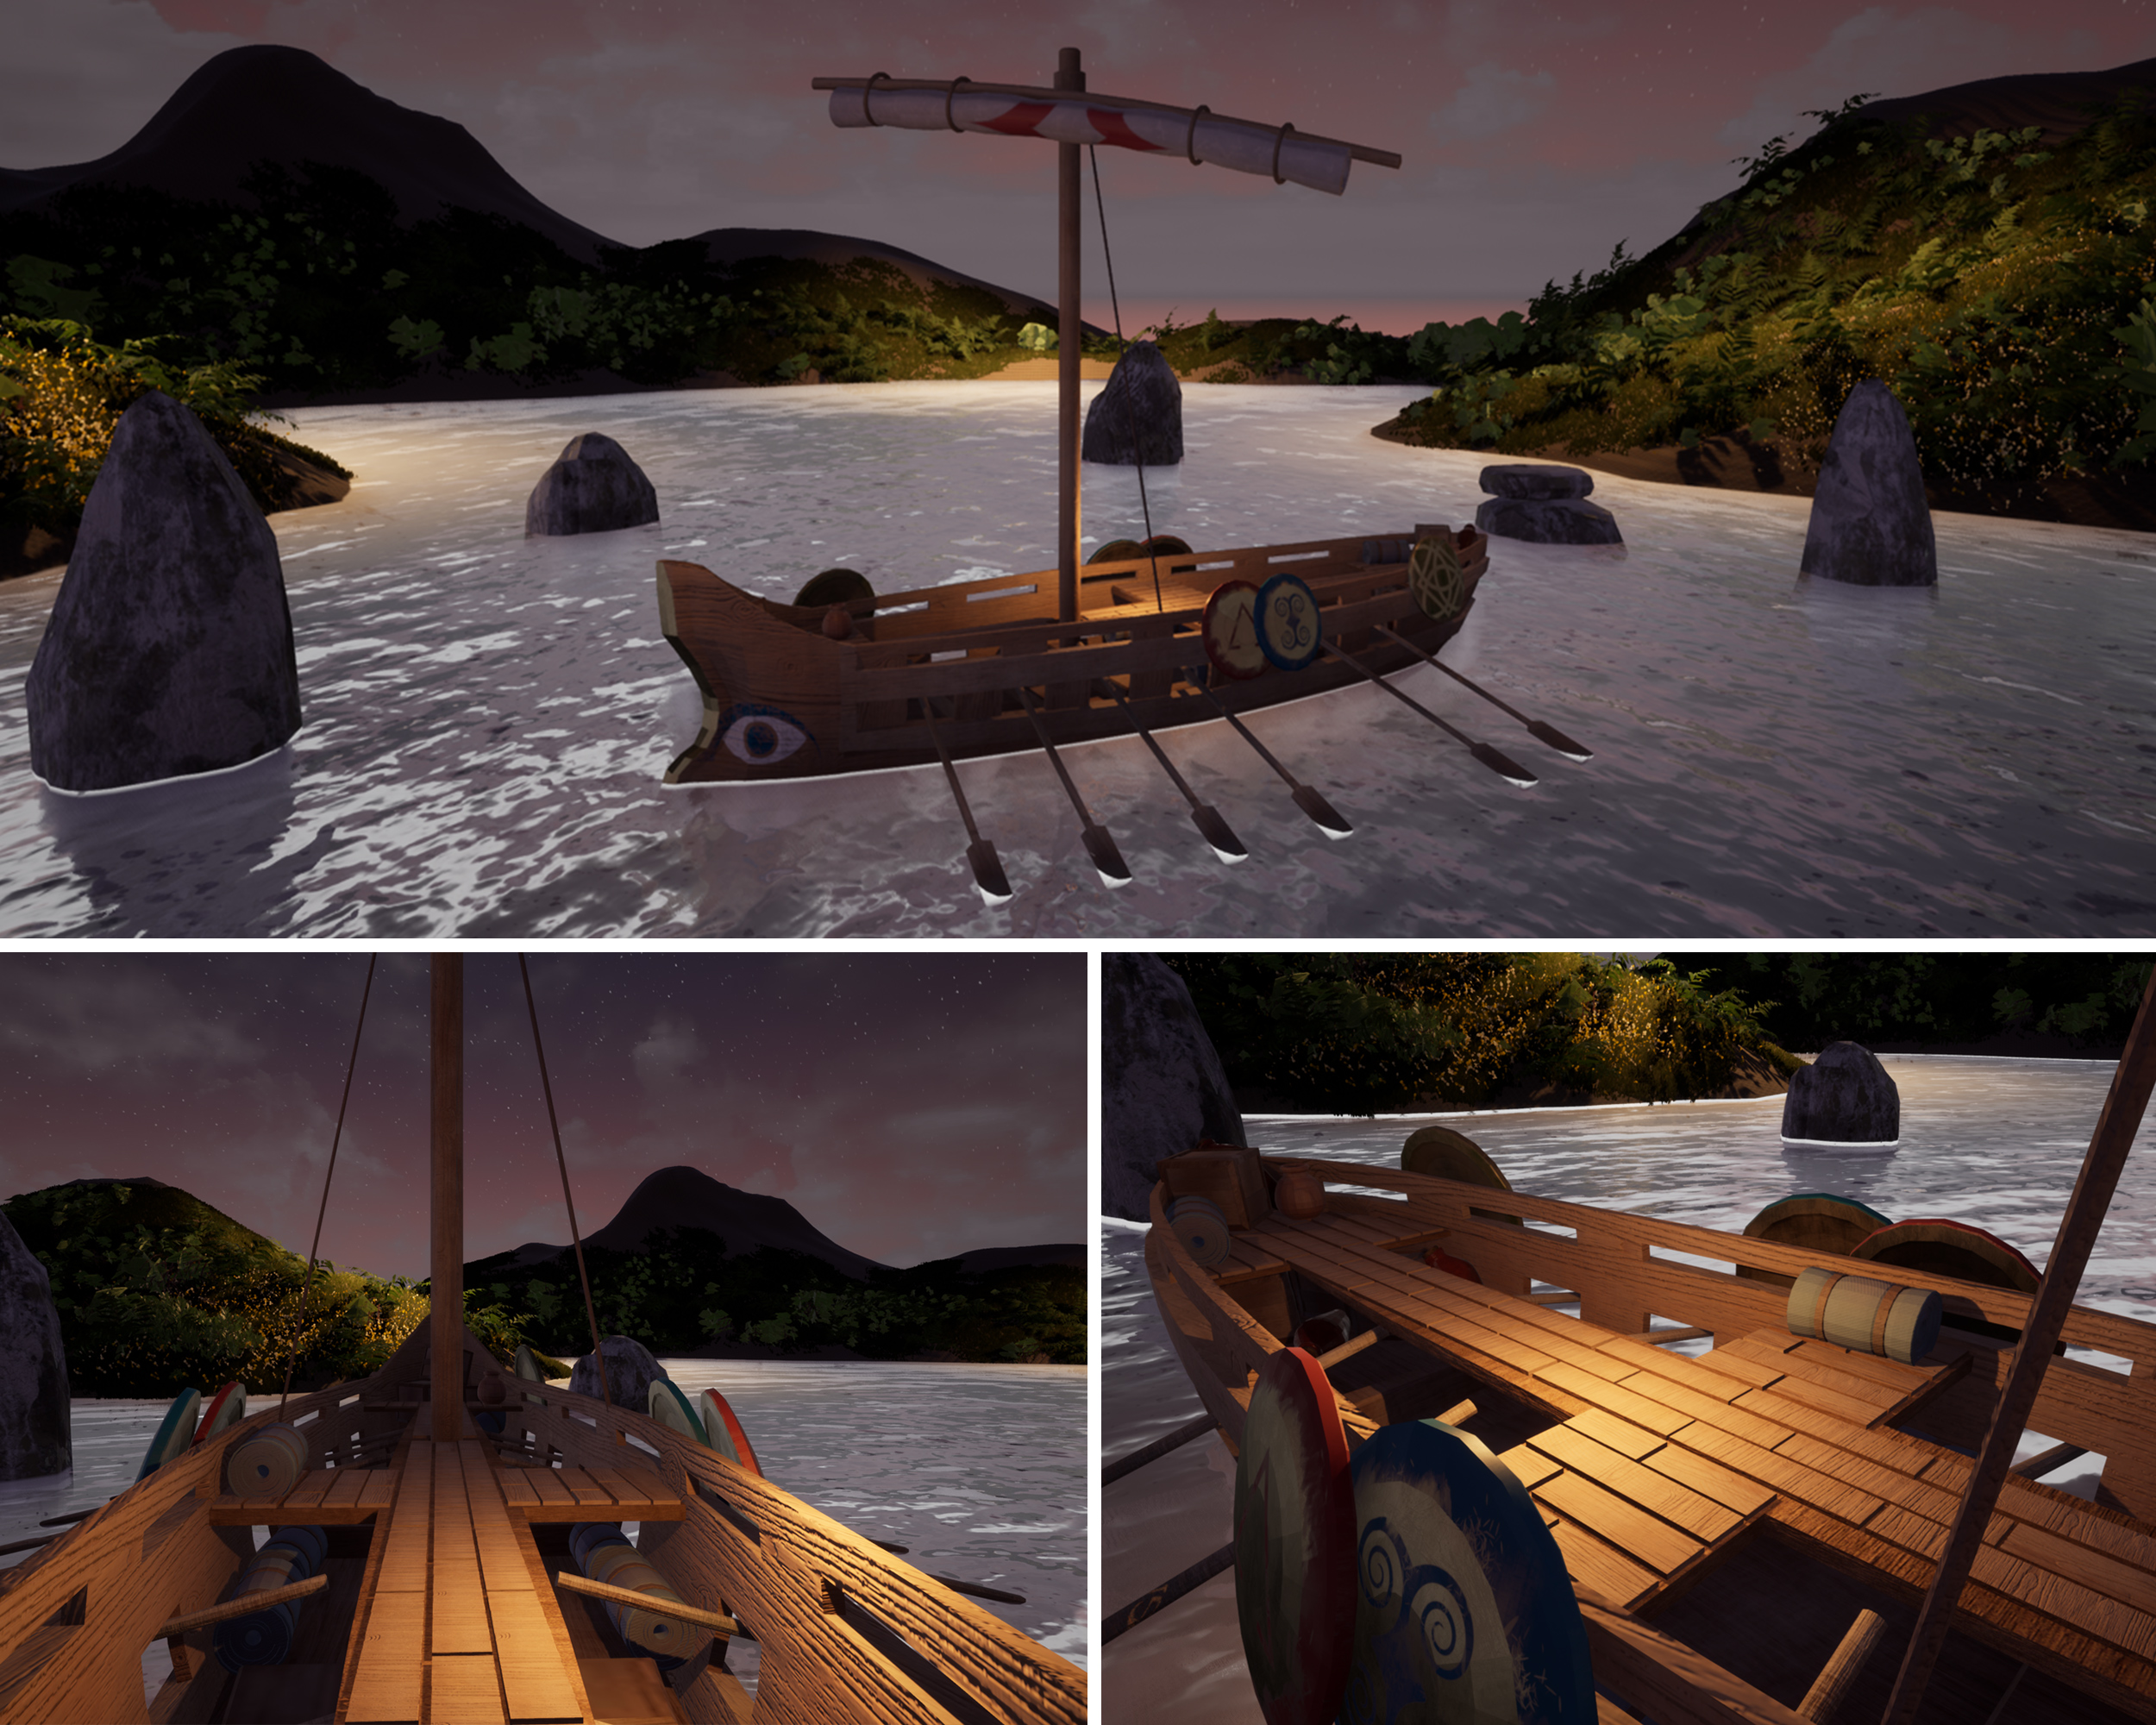 BA Games Art setting by Alexander Norman portraying an ancient Greek galley floating in shallow waters amongst rocks against a sunset landscape.